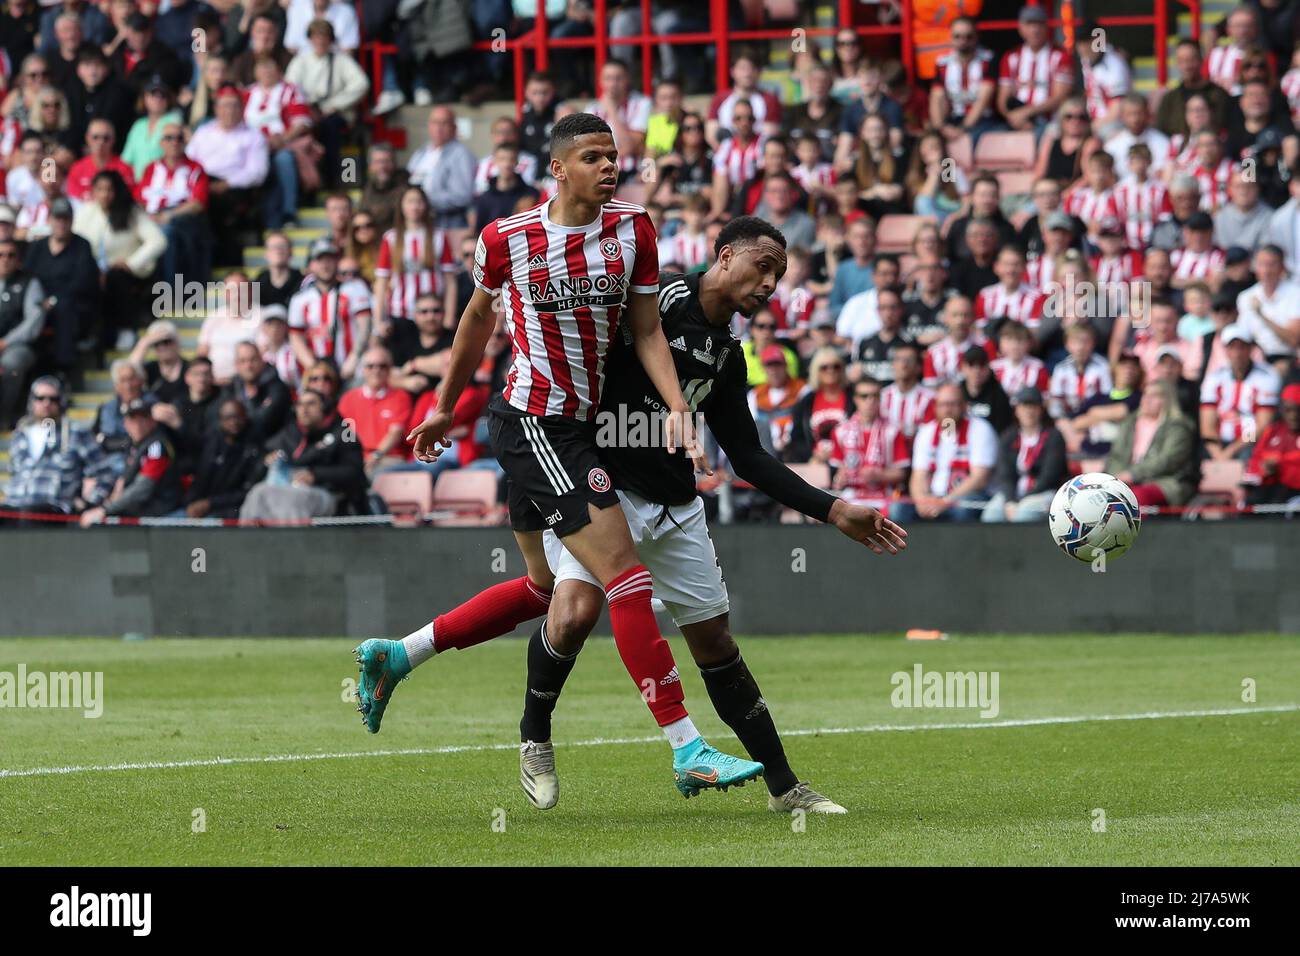 William Osula #32 of Sheffield United and Kenny Tete #2 of Fulham battle for the ball in Sheffield, United Kingdom on 5/7/2022. (Photo by James Heaton/News Images/Sipa USA) Stock Photo